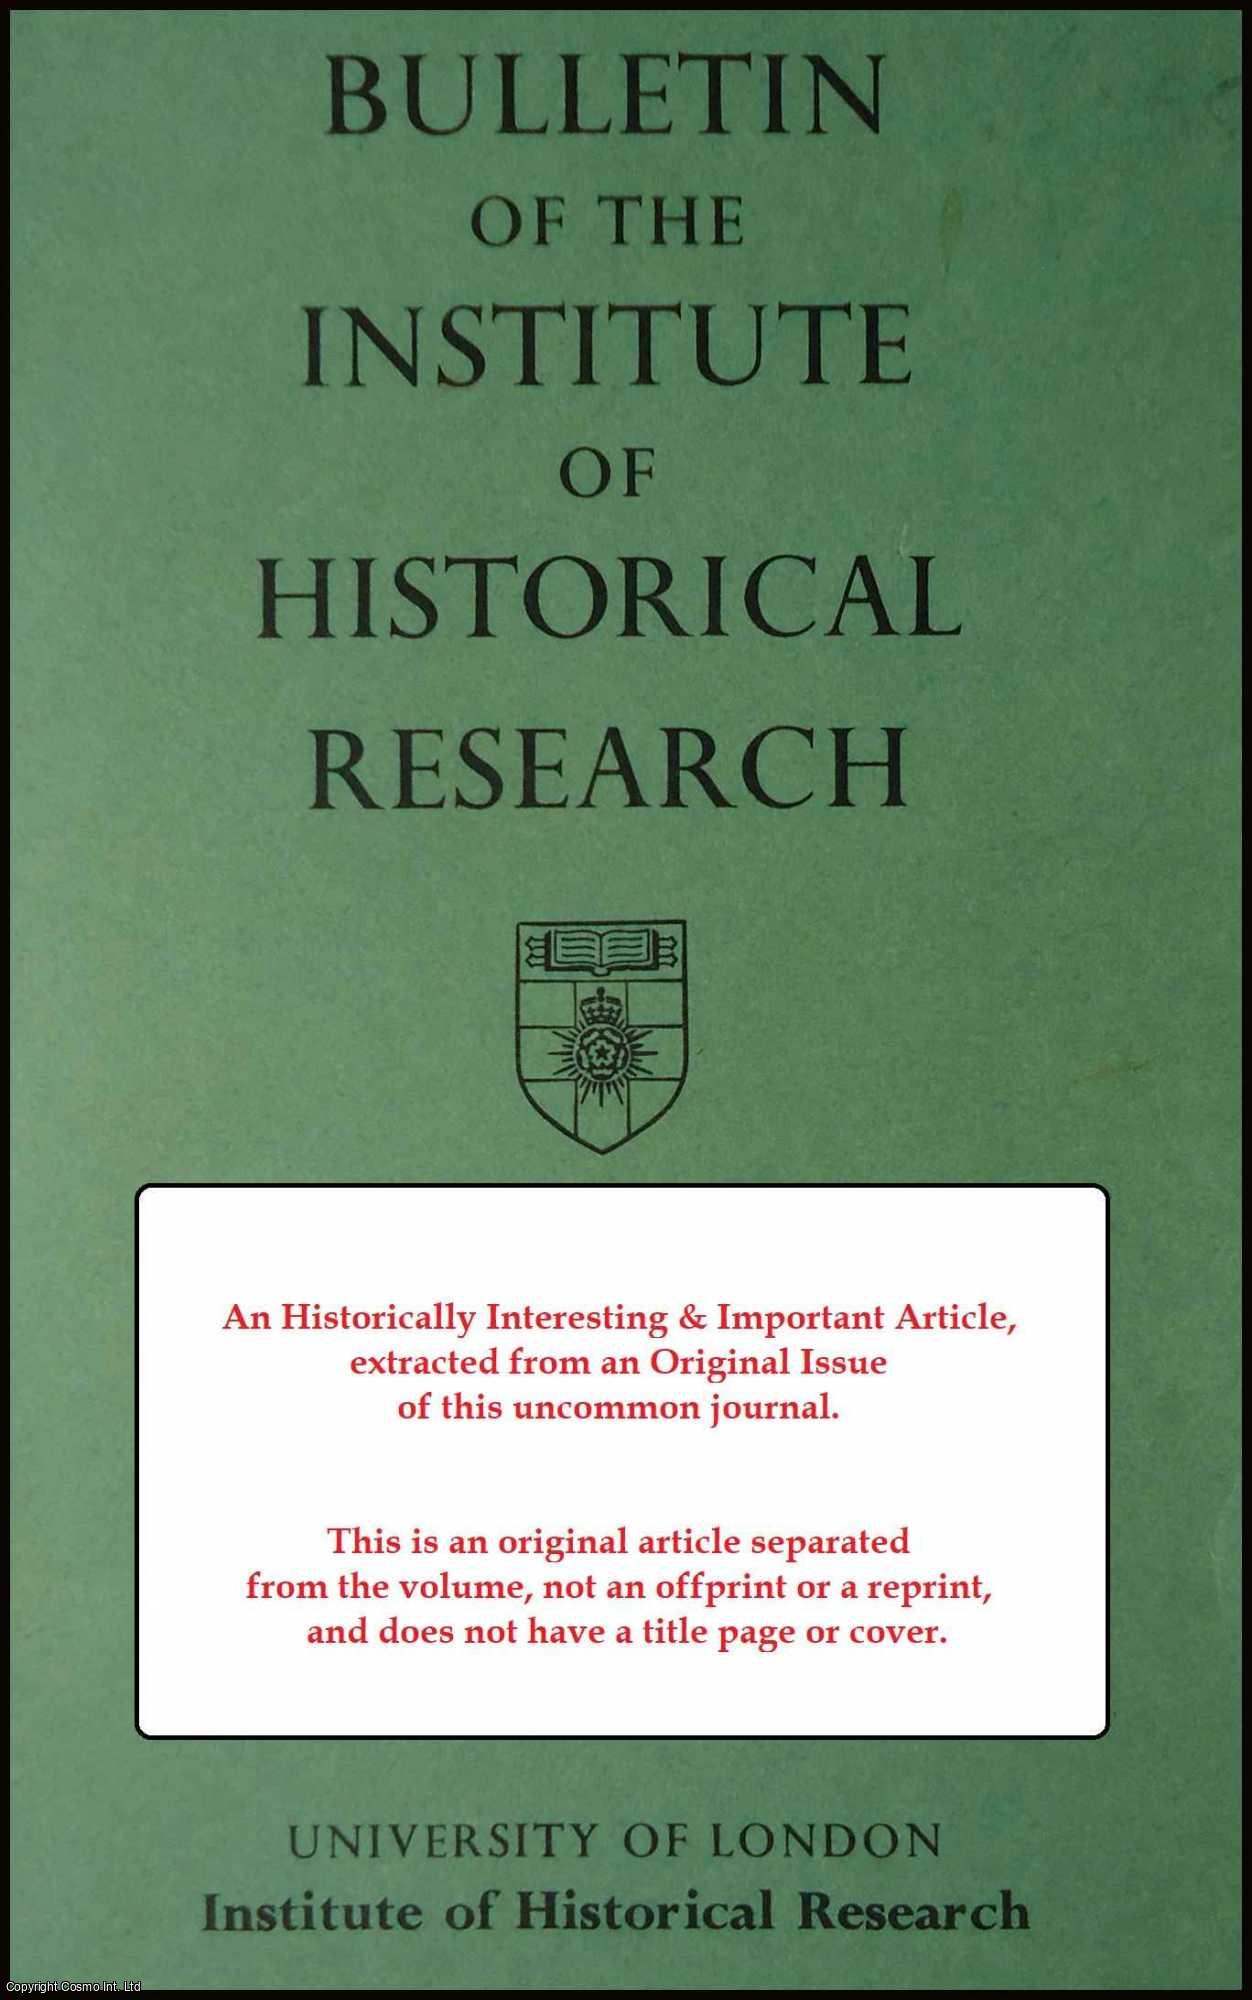 C.H. Firth - The undeserved neglect of Earlier English Historians by their Successors. An original article from the Bulletin of the Institute of Historical Research, 1928.